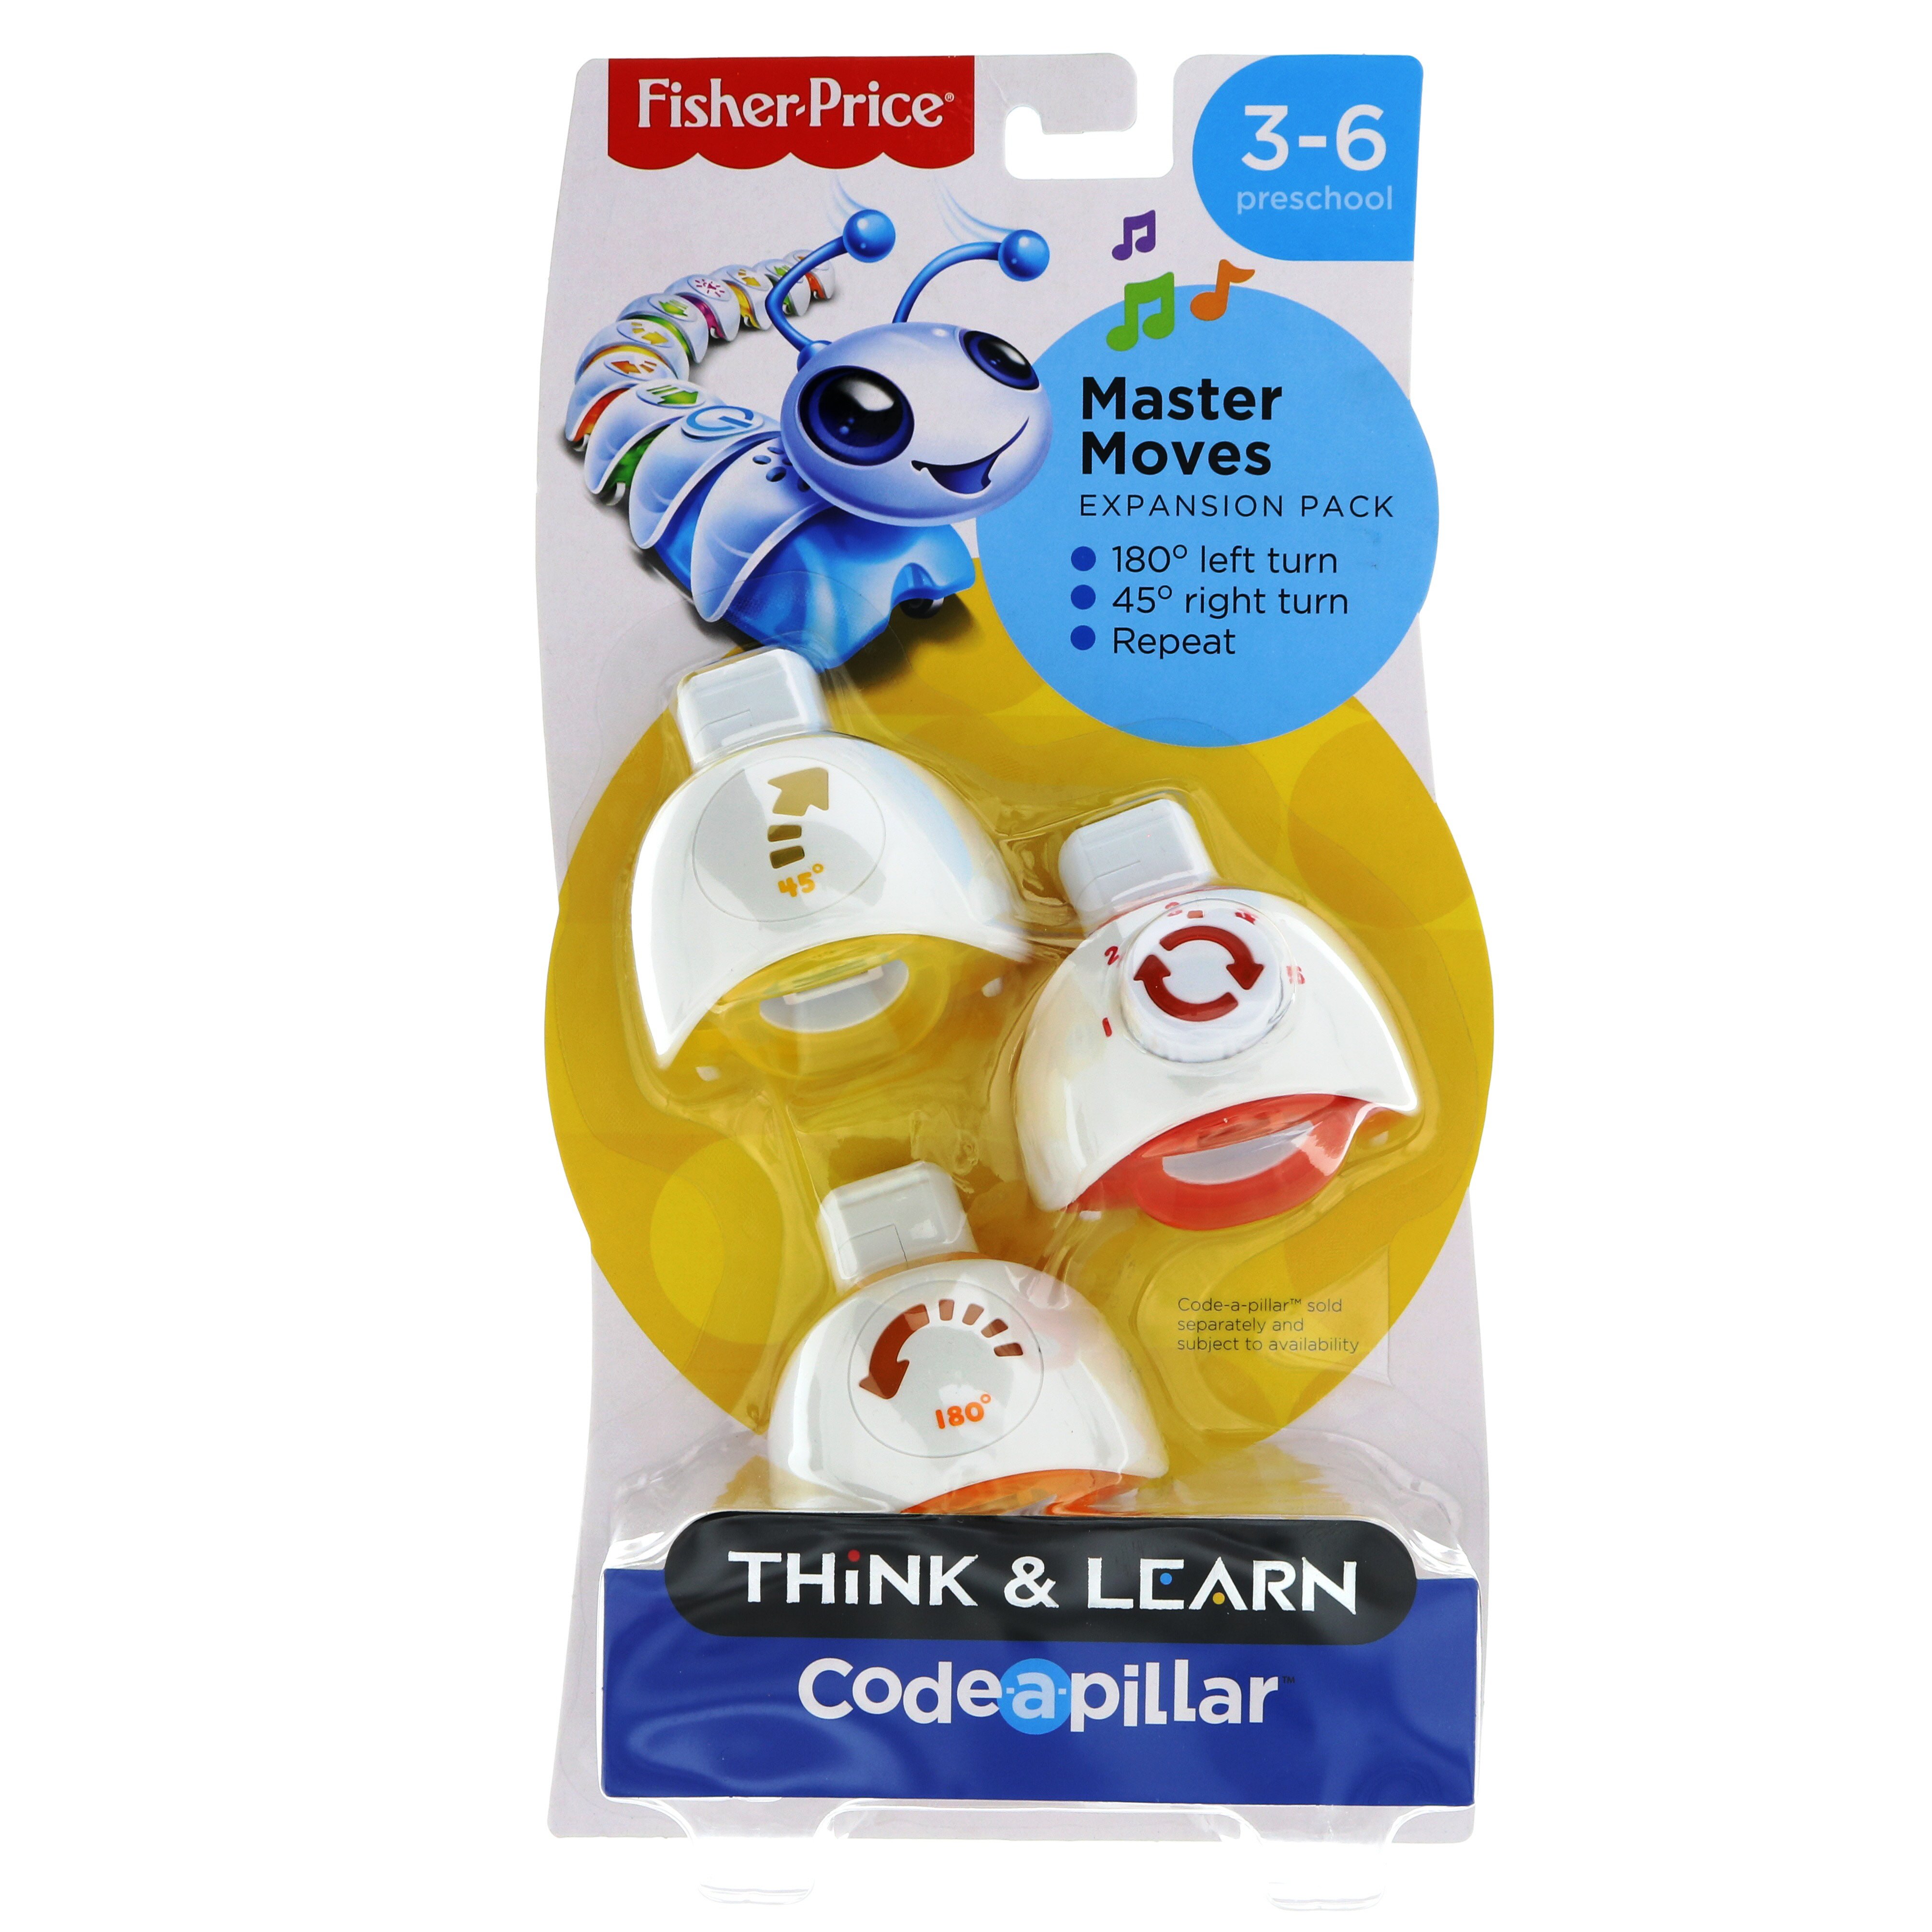 Fisher-Price Think & Learn Code-a-pillar Master Moves Expansion Pack 